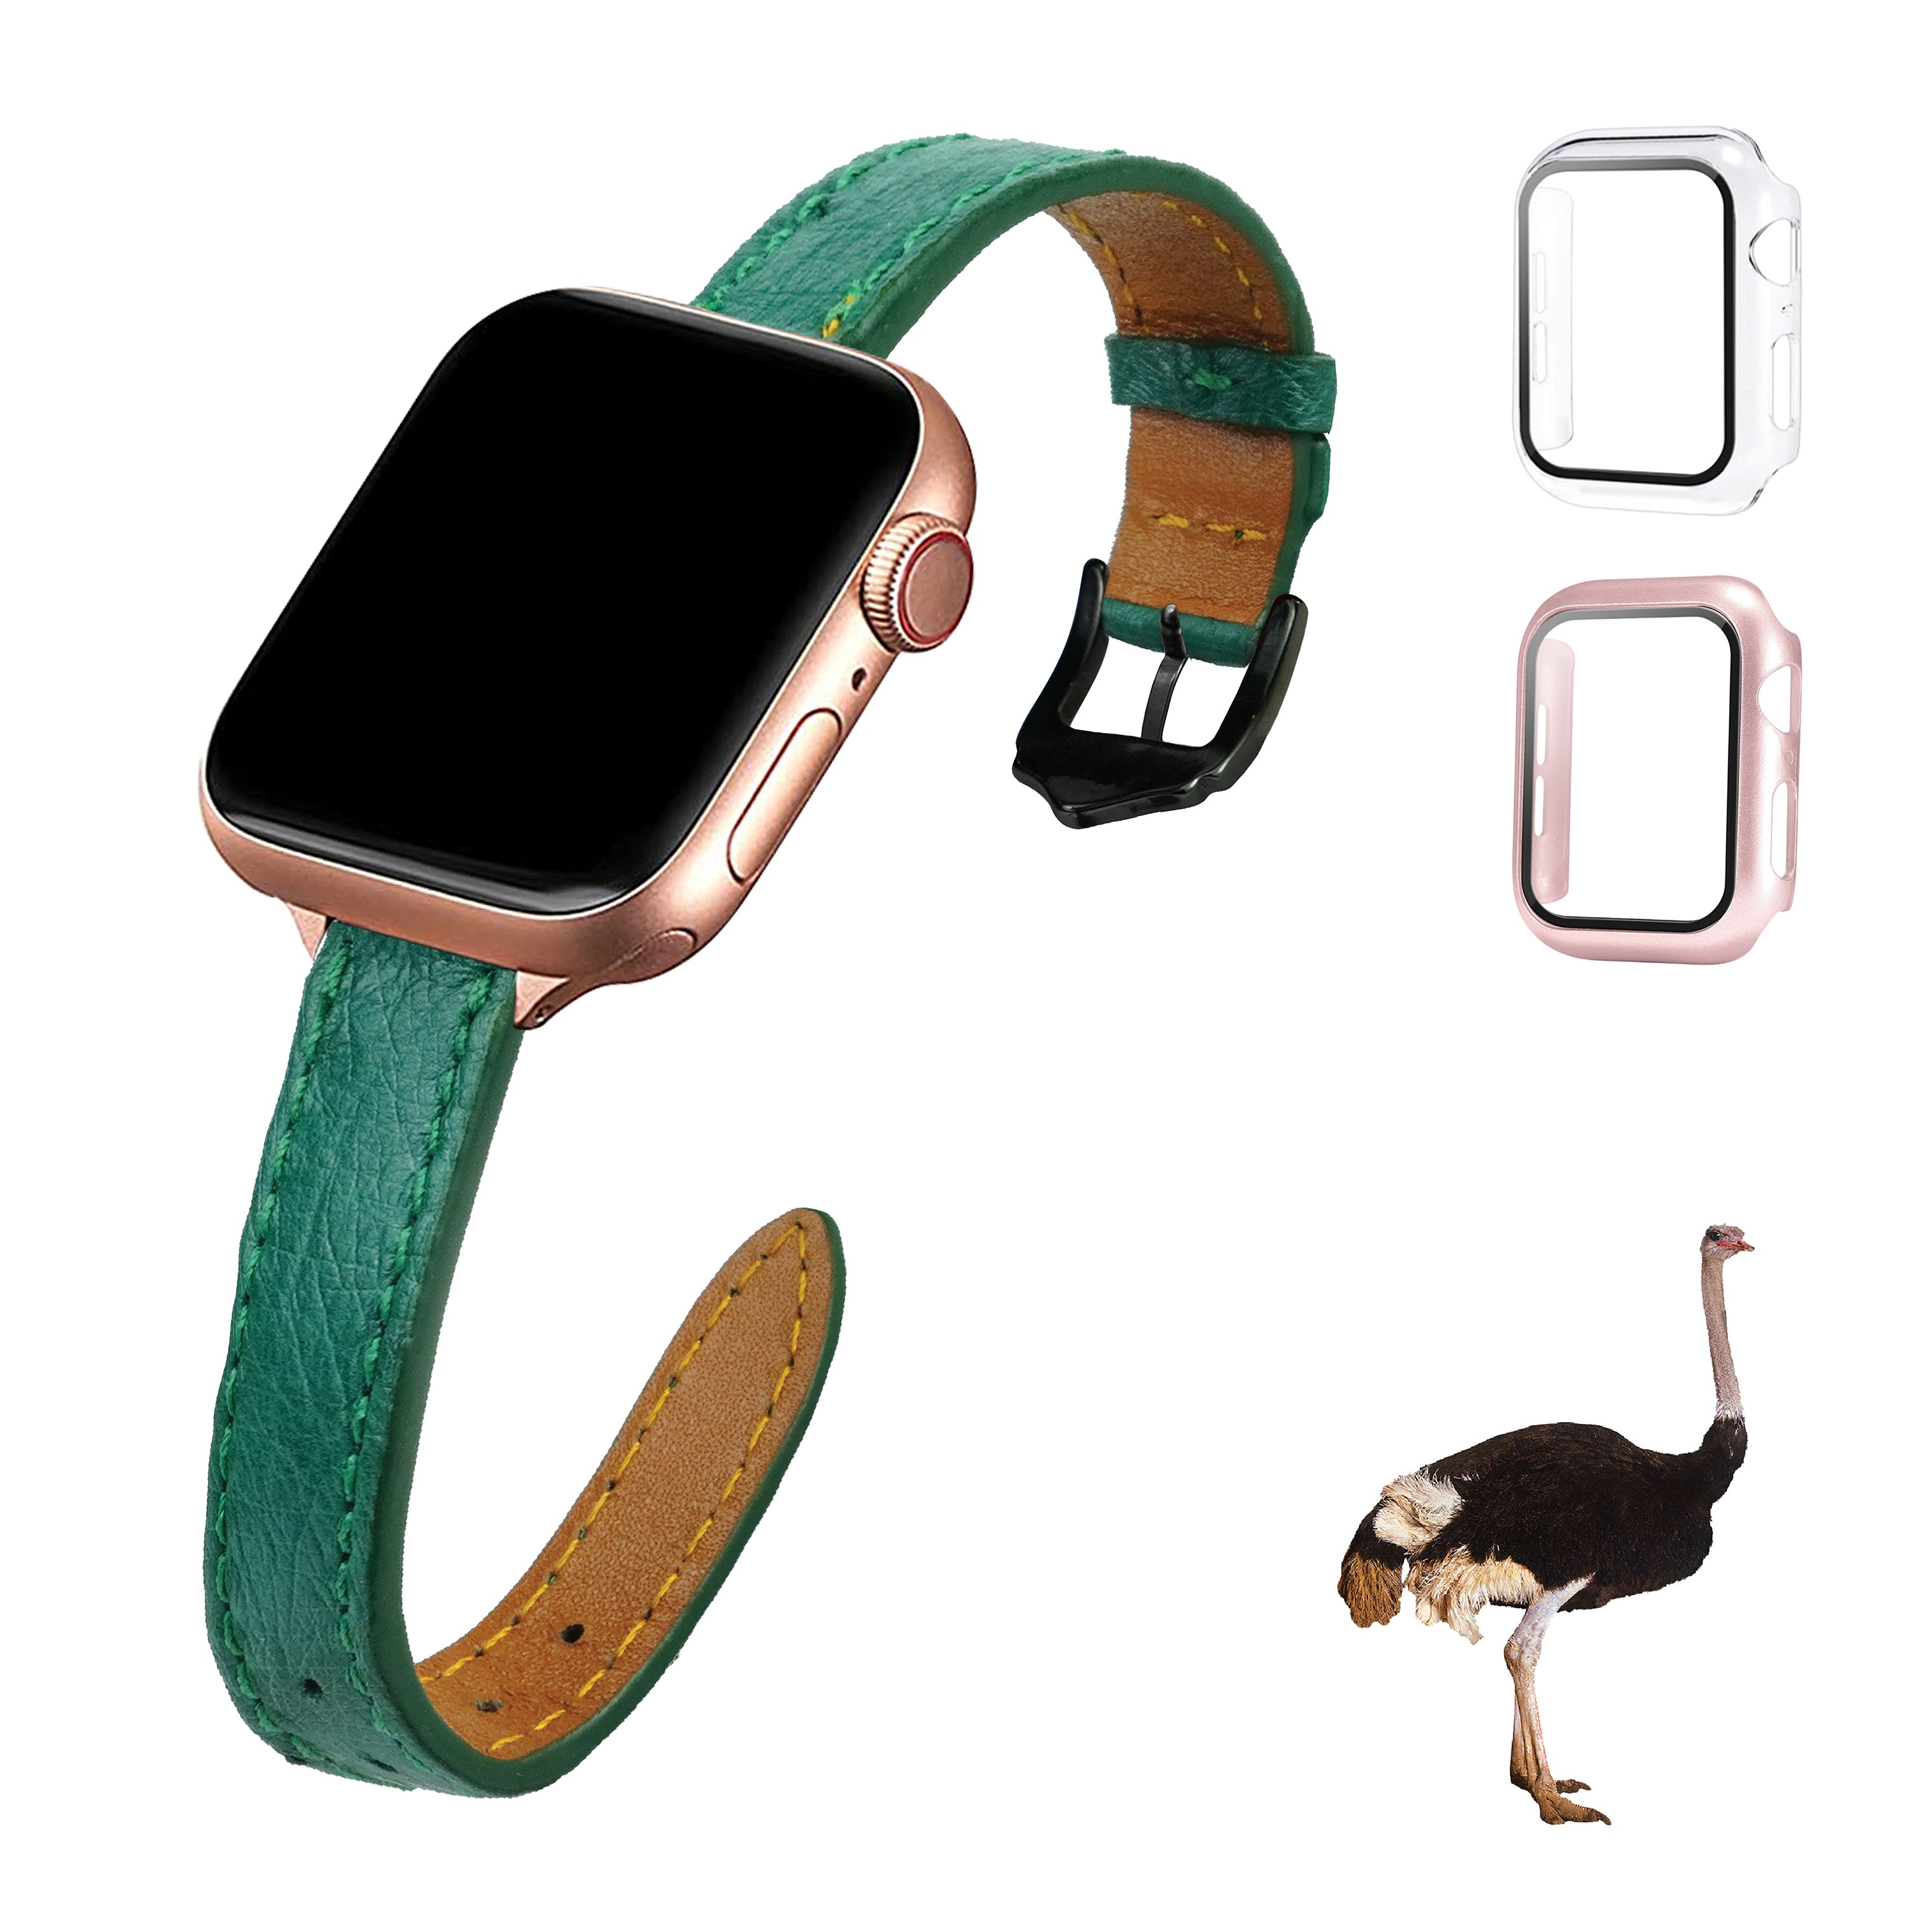 Green Flat Ostrich Leather Band Compatible Apple Watch Iwatch 40mm Screen Protector Case Black Adapter Replacement Strap For Smartwatch Series 4 5 6 SE Leather Handmade AW-188B-W-40MM